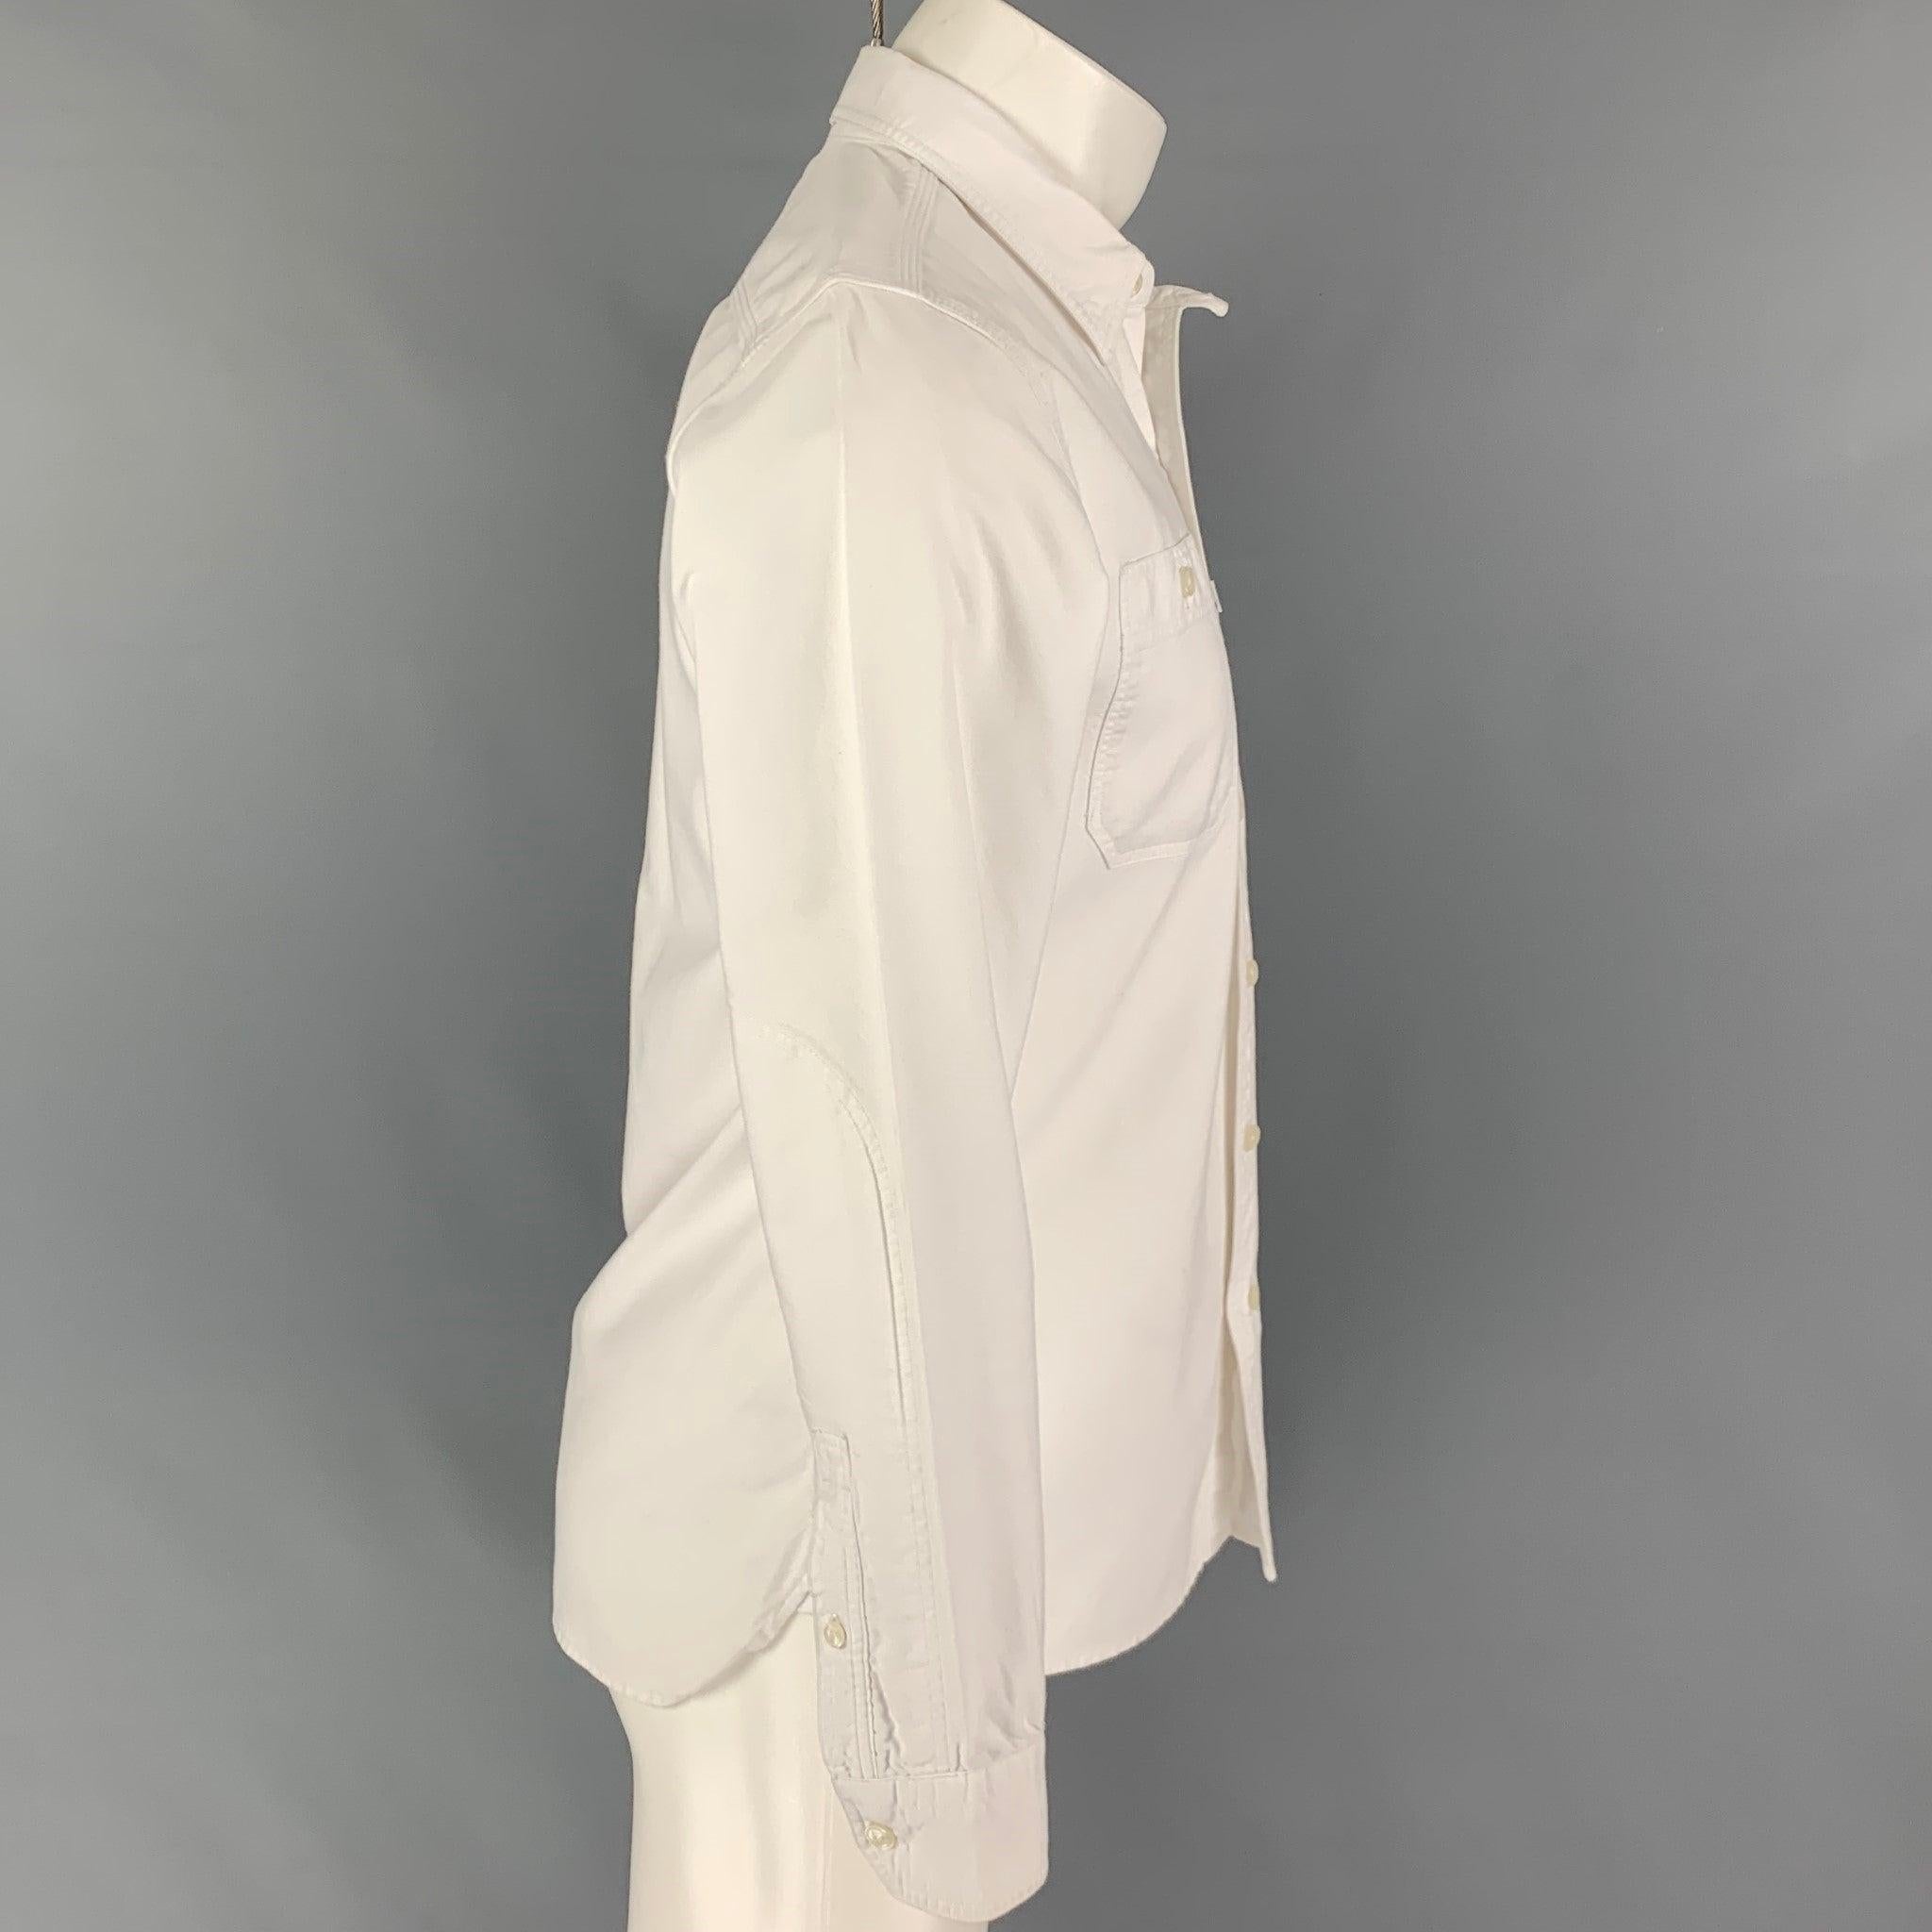 LEVI'S long sleeve shirt comes in a white cotton featuring a spread collar, patch pockets, and a button up closure.
Very Good
Pre-Owned Condition. 

Marked:   M  

Measurements: 
 
Shoulder: 17 inches  Chest:
40 inches  Sleeve: 24.5 inches  Length: